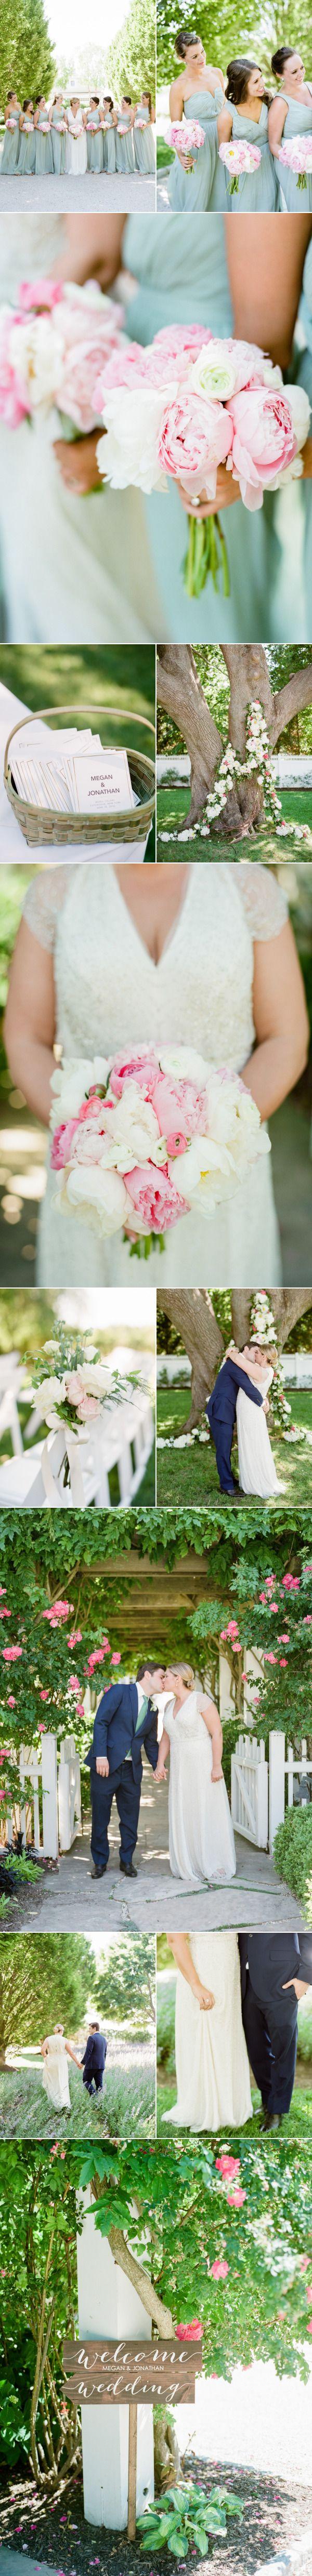 Hochzeit - A Classic Vineyard Wedding Loaded With Pink Peonies